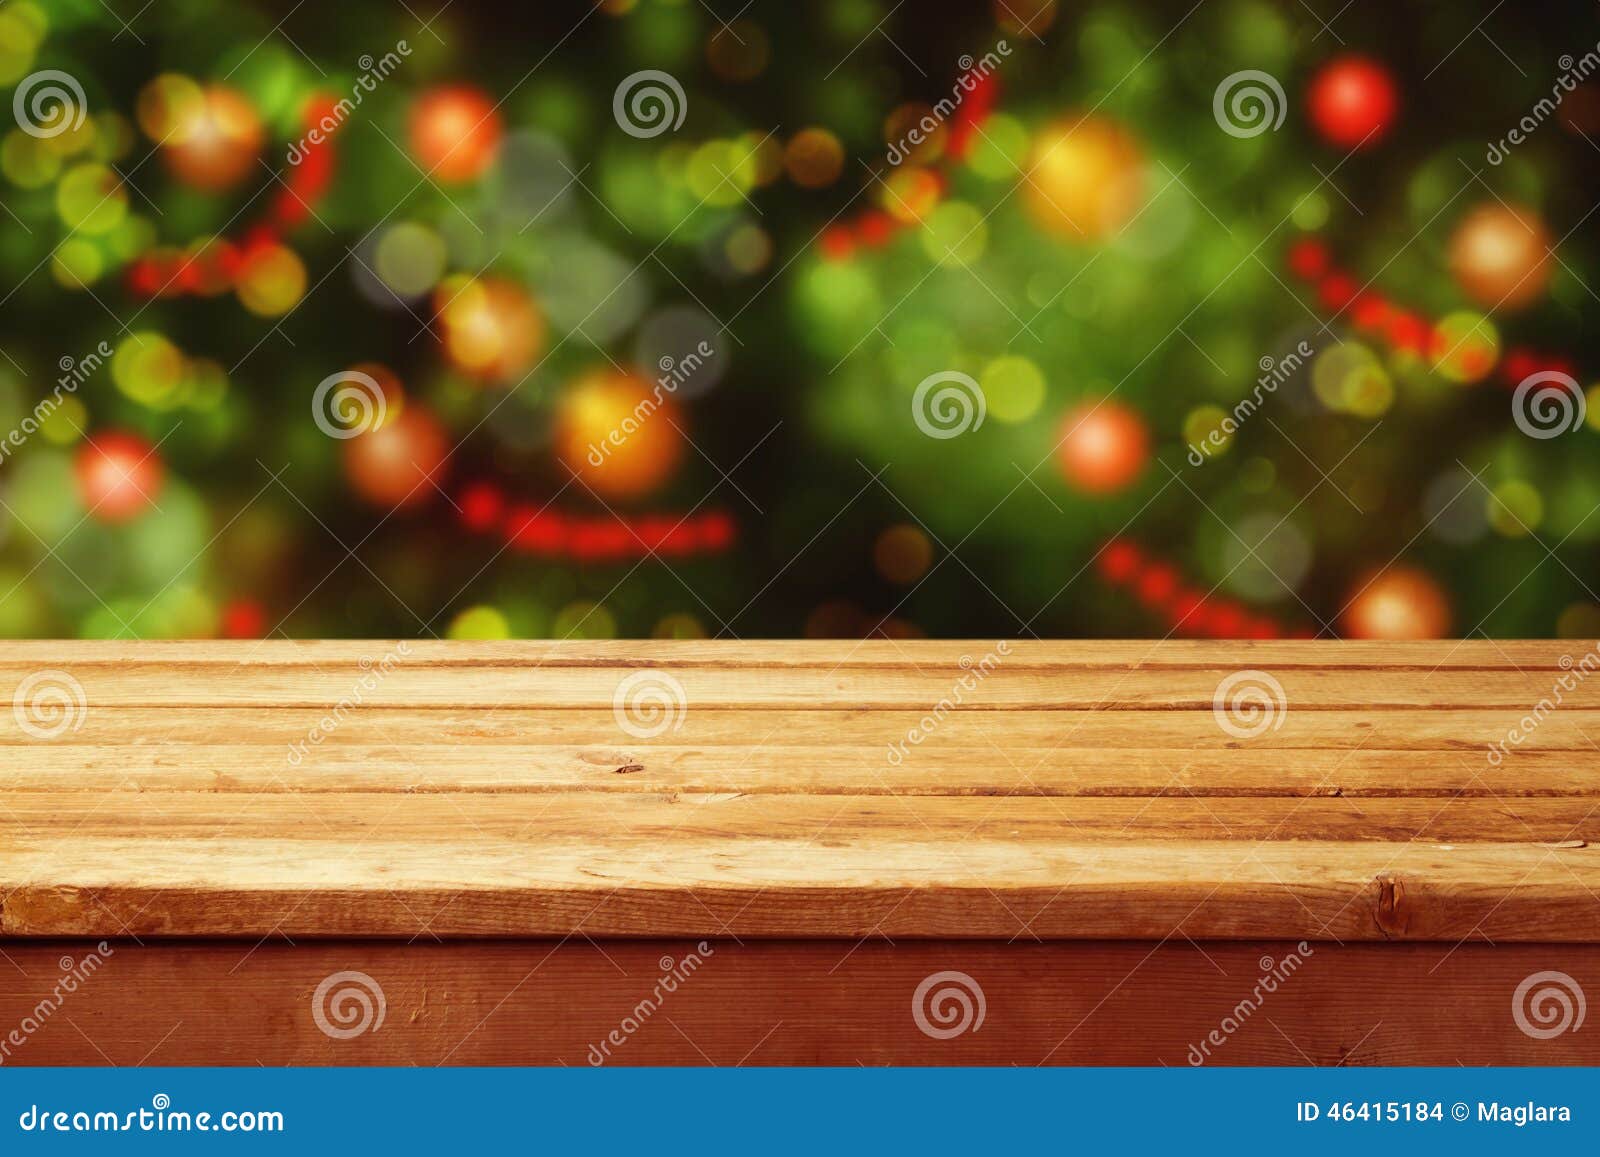 christmas holiday background with empty wooden deck table over festive bokeh. ready for product montage